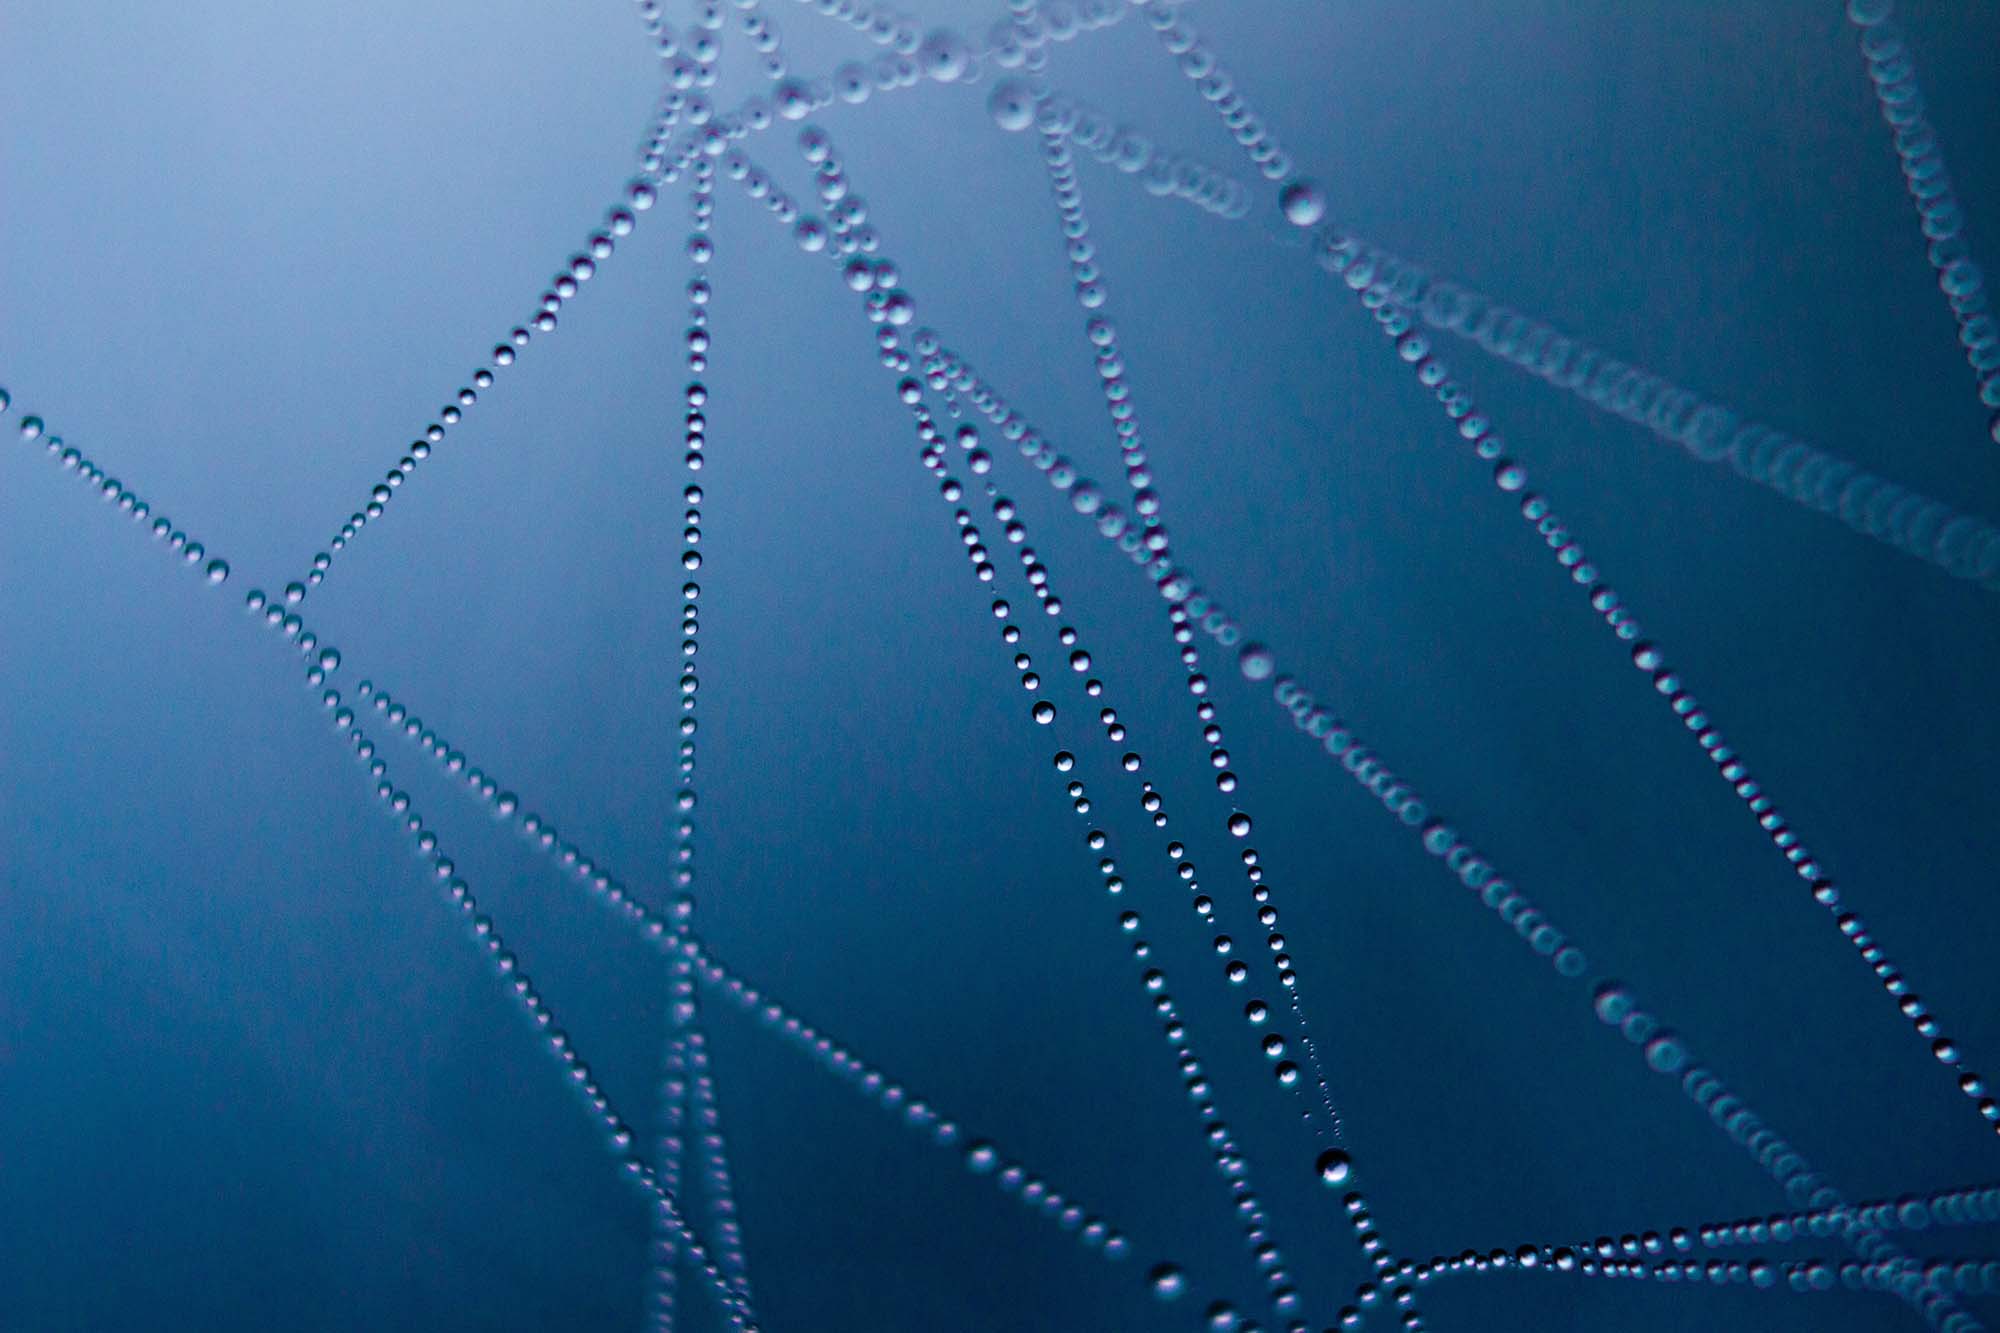 Close-up of dew drops on a spiderweb on a blue background